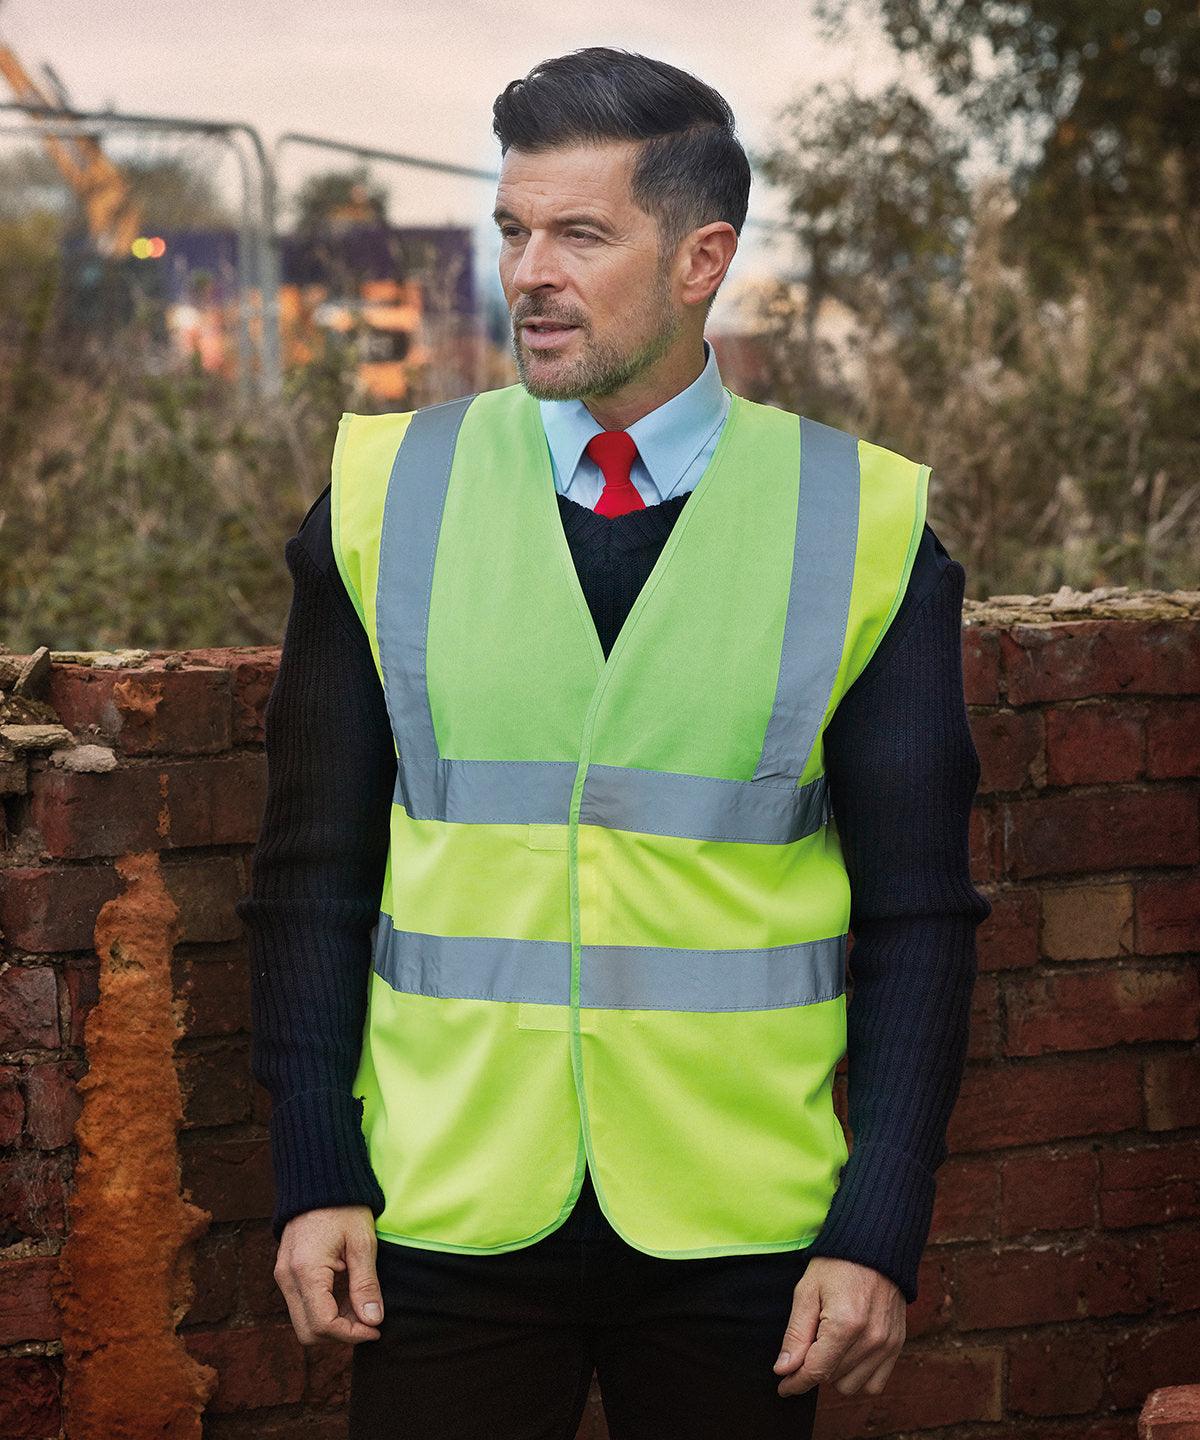 Raspberry Yoke/Yellow - Hi-vis 2-band-and-braces waistcoat (HVW100) Safety Vests Yoko Must Haves, Personal Protection, Plus Sizes, Safety Essentials, Safetywear, Workwear Schoolwear Centres